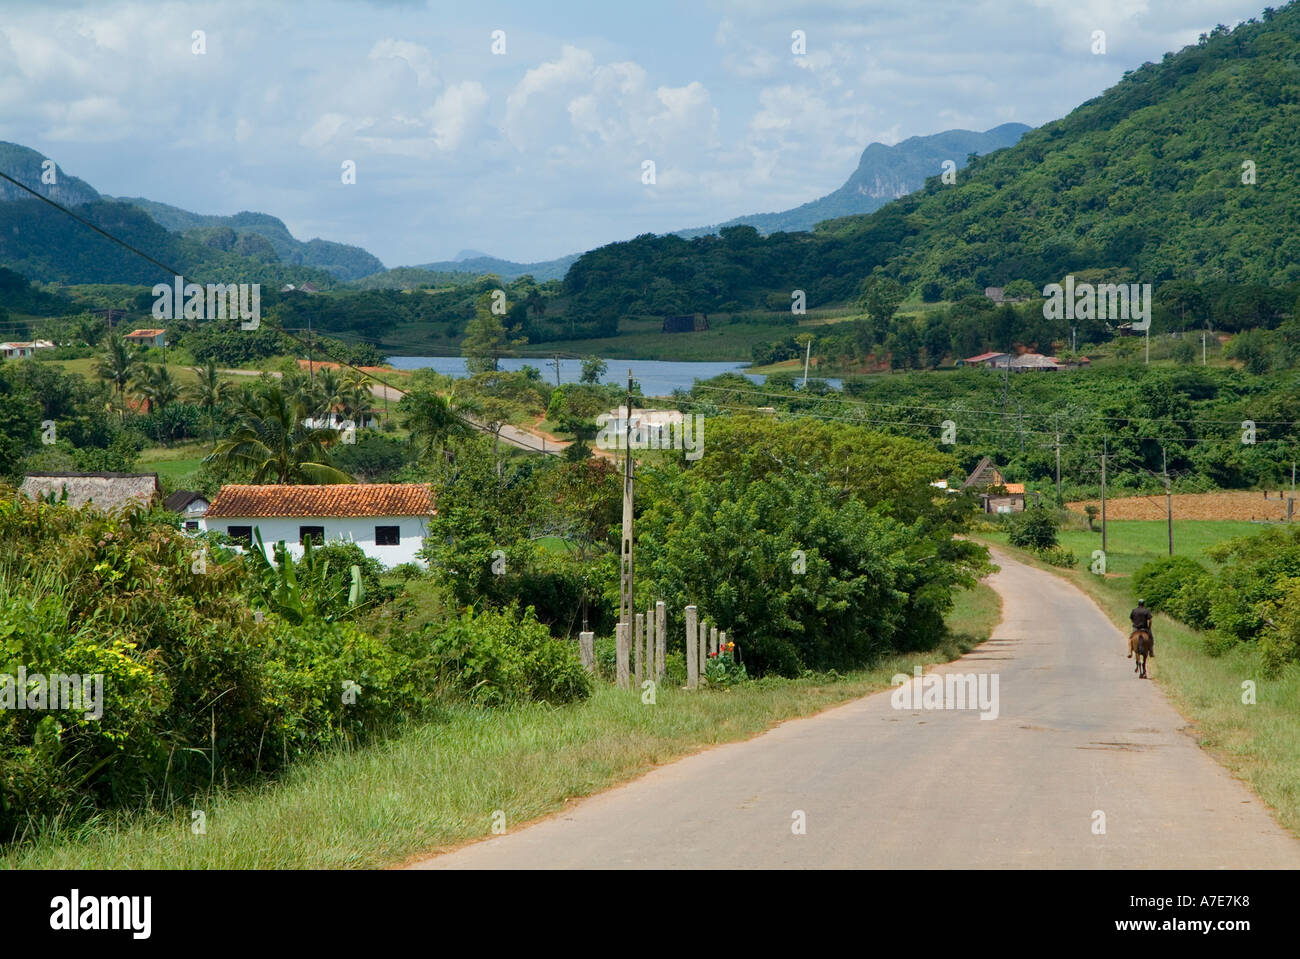 Man riding his horse along a rural road in the Vinales Valley, Cuba. Stock Photo